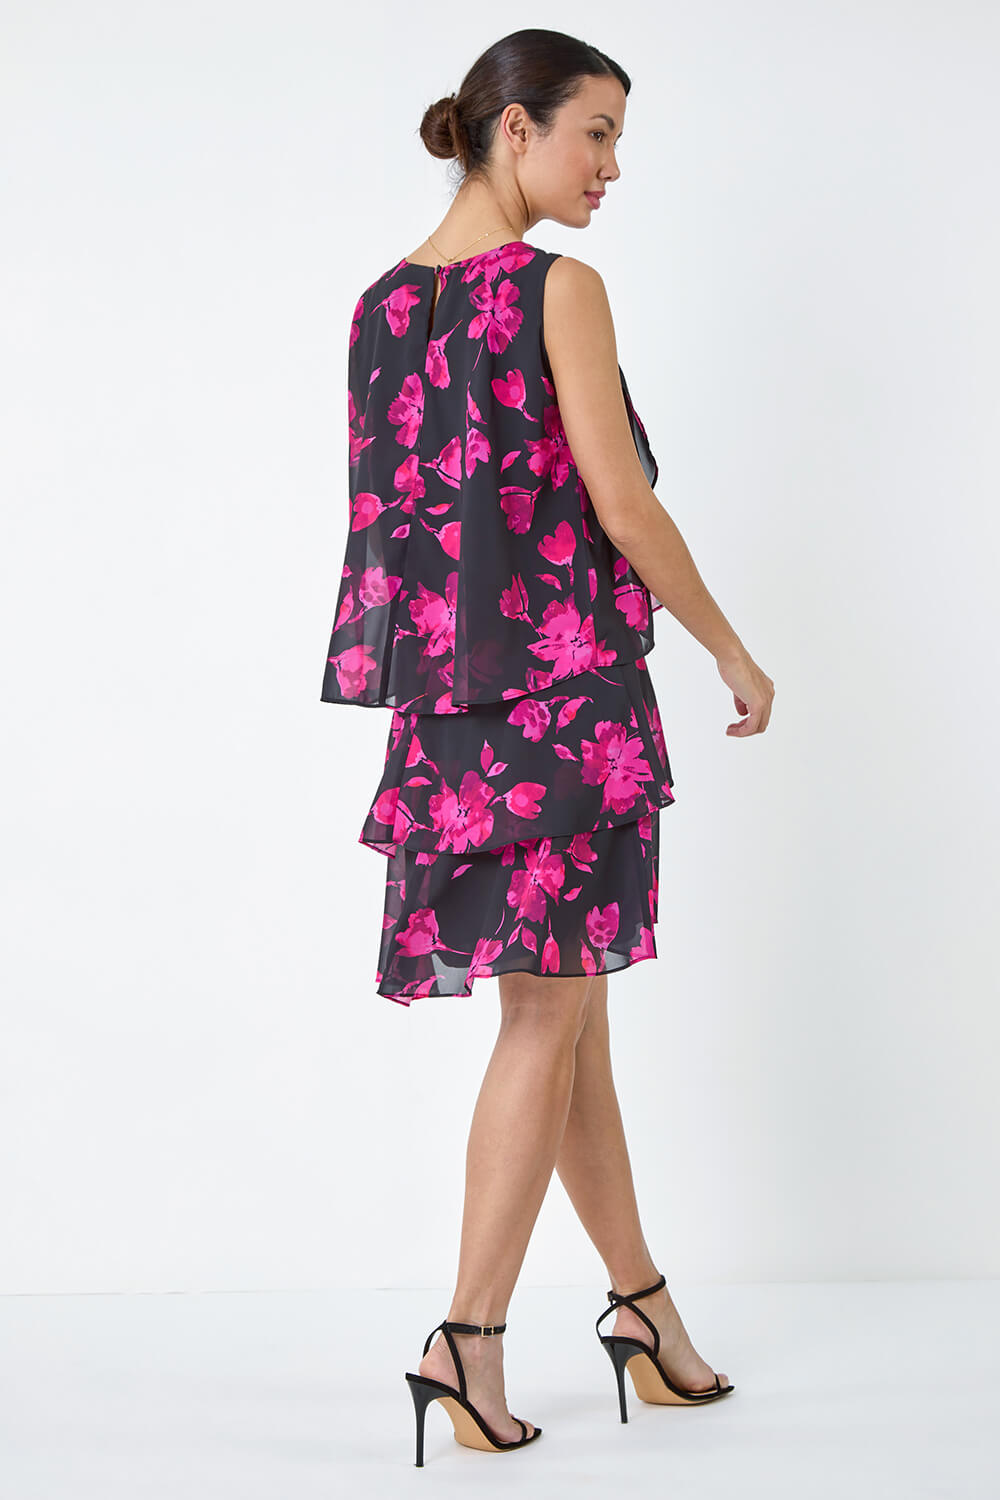 Black Floral Print Tiered Layer Dress, Image 3 of 5